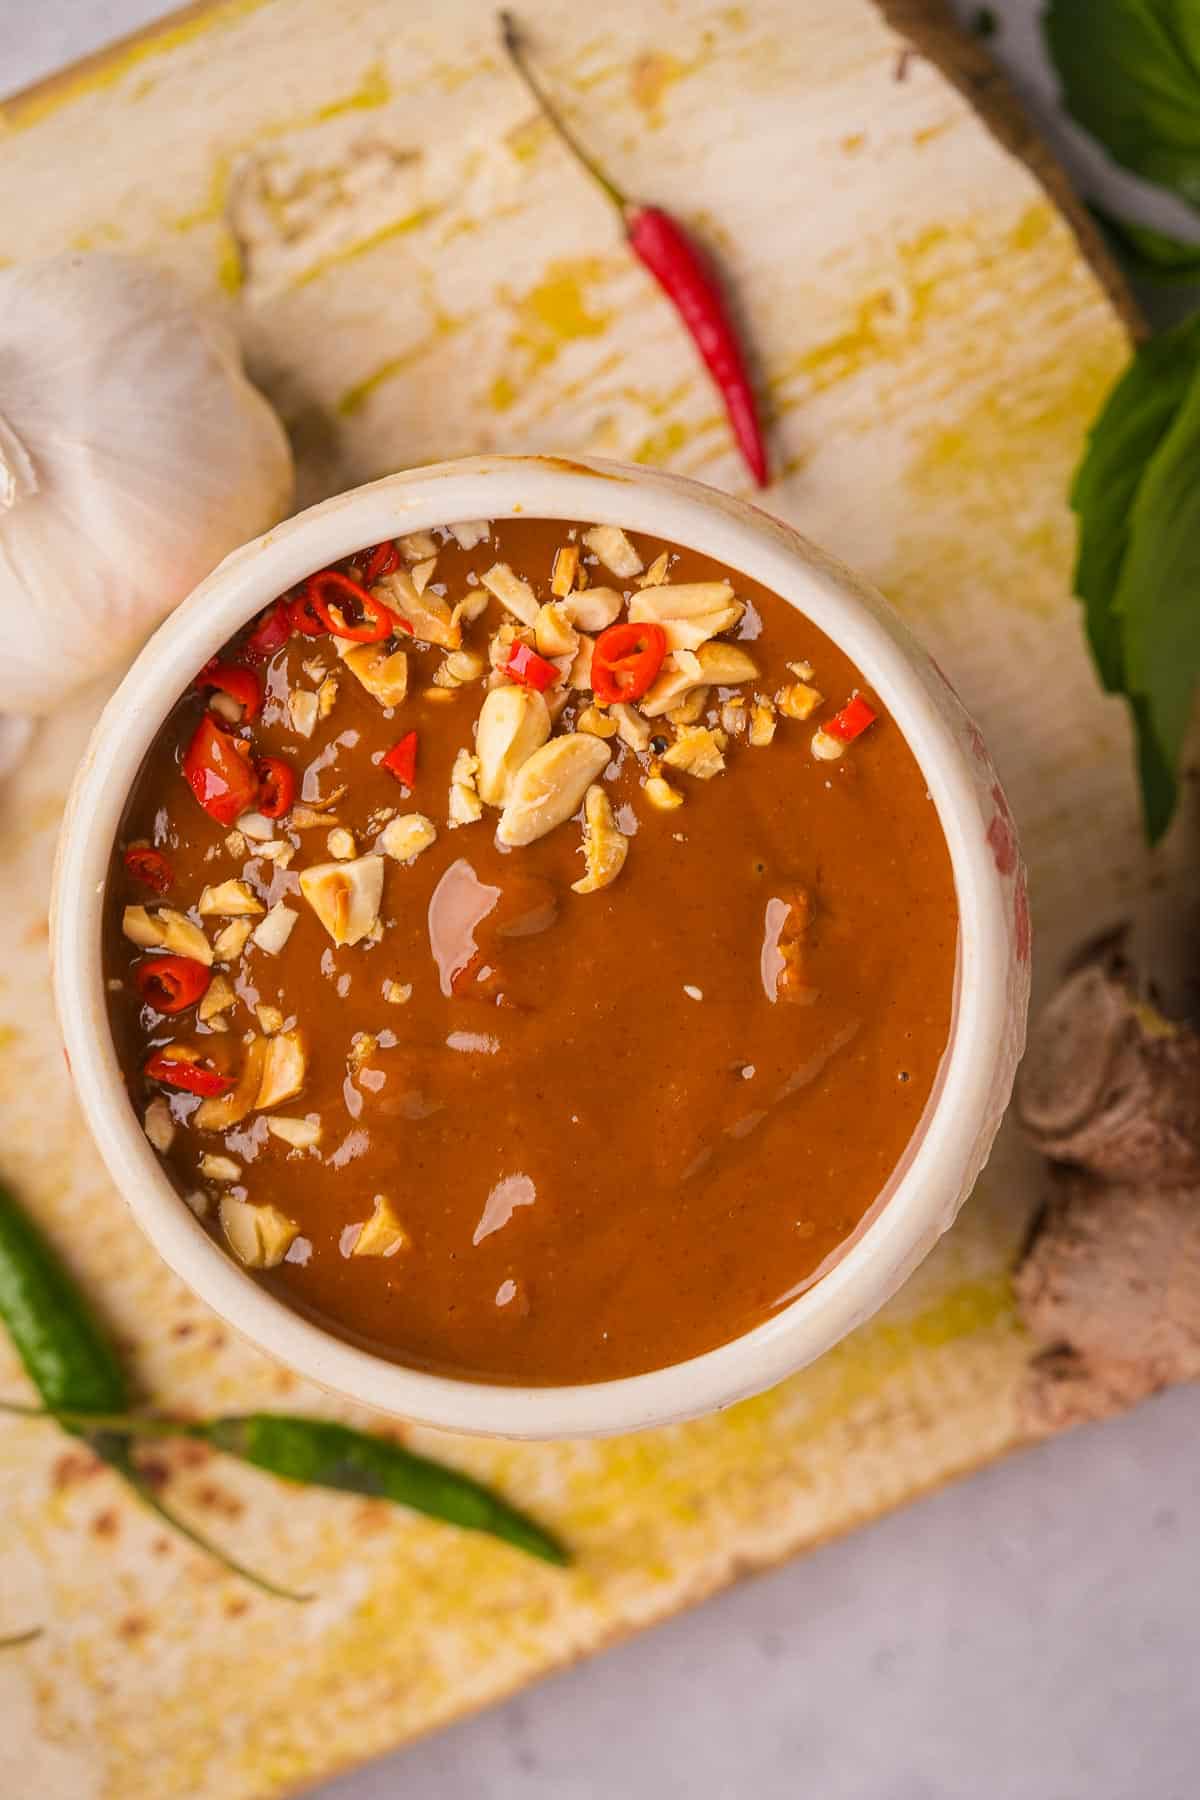 Vietnamese peanut sauce in a bowl on a wooden board with garlic and chilies on it.